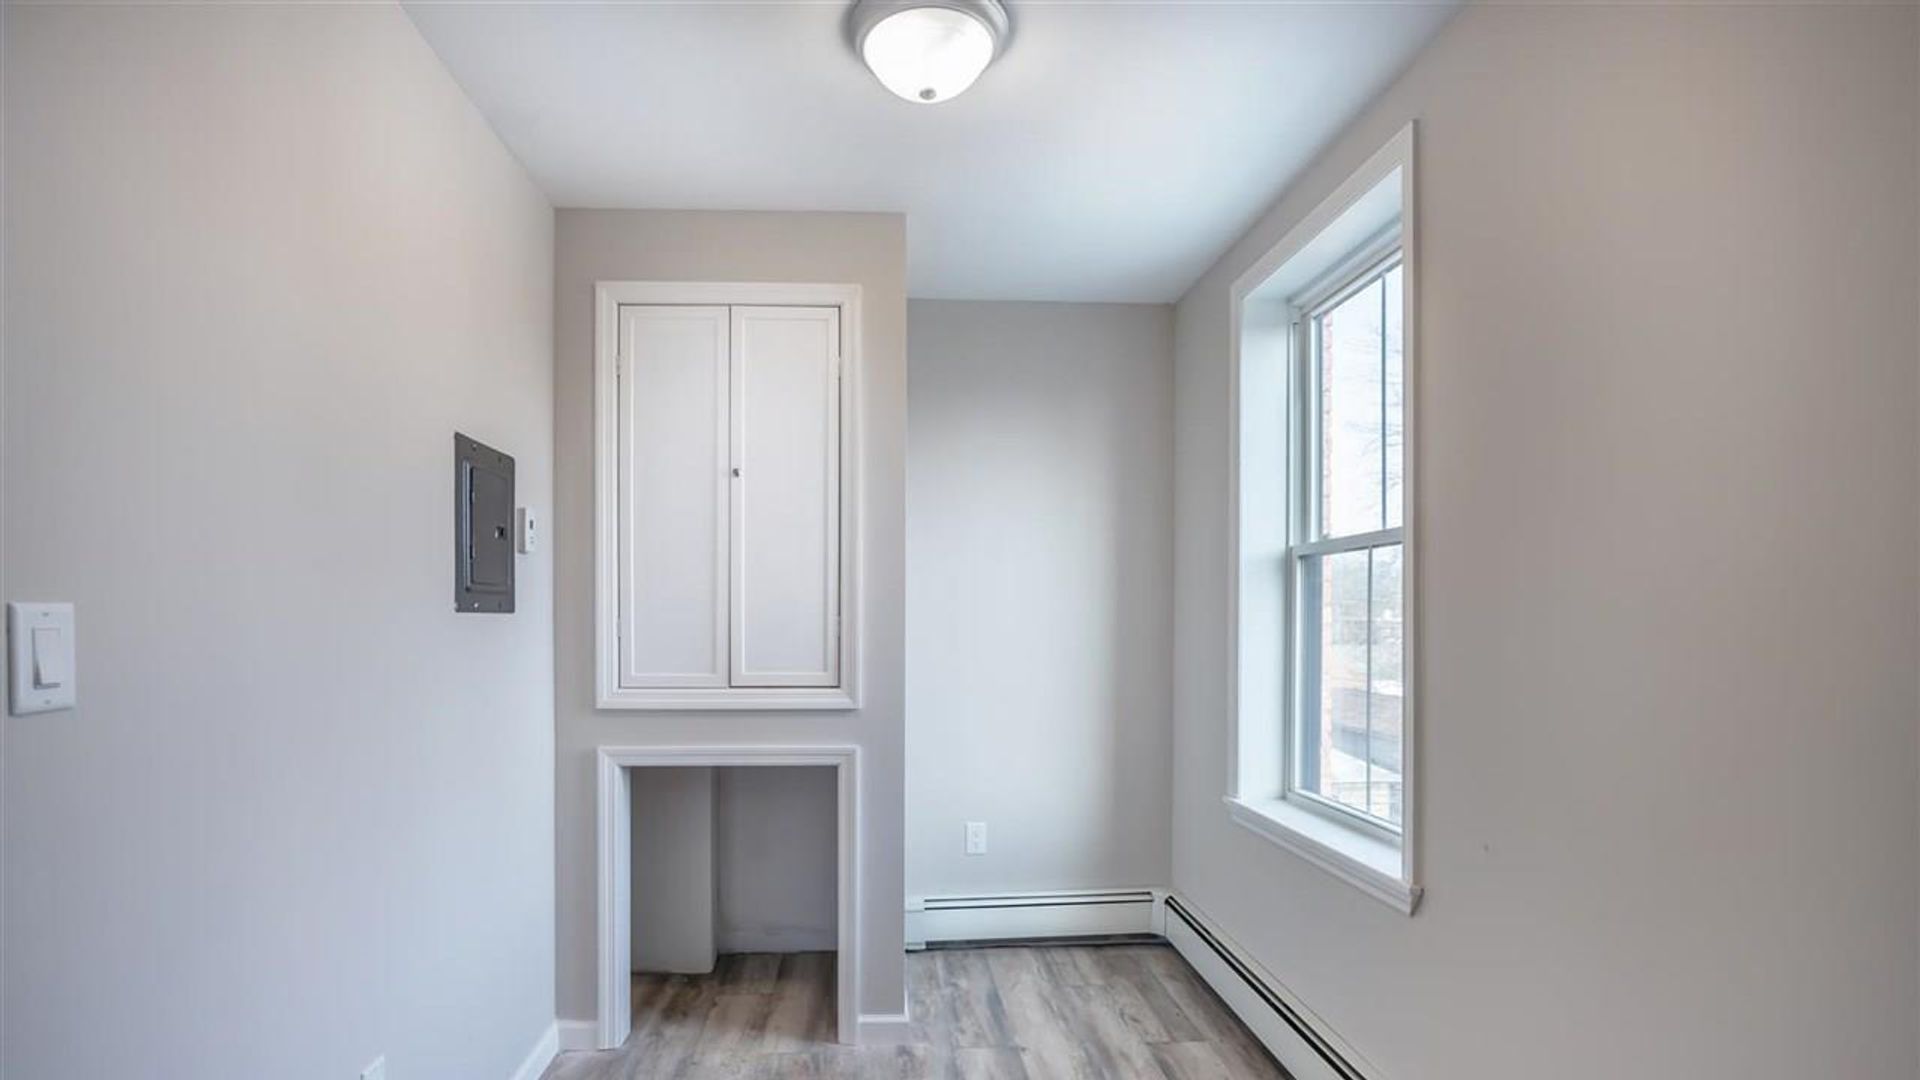 1 bedroom apartment at 666 Broadway, Kingston, NY 12401, USA | #7061440 | Rentberry